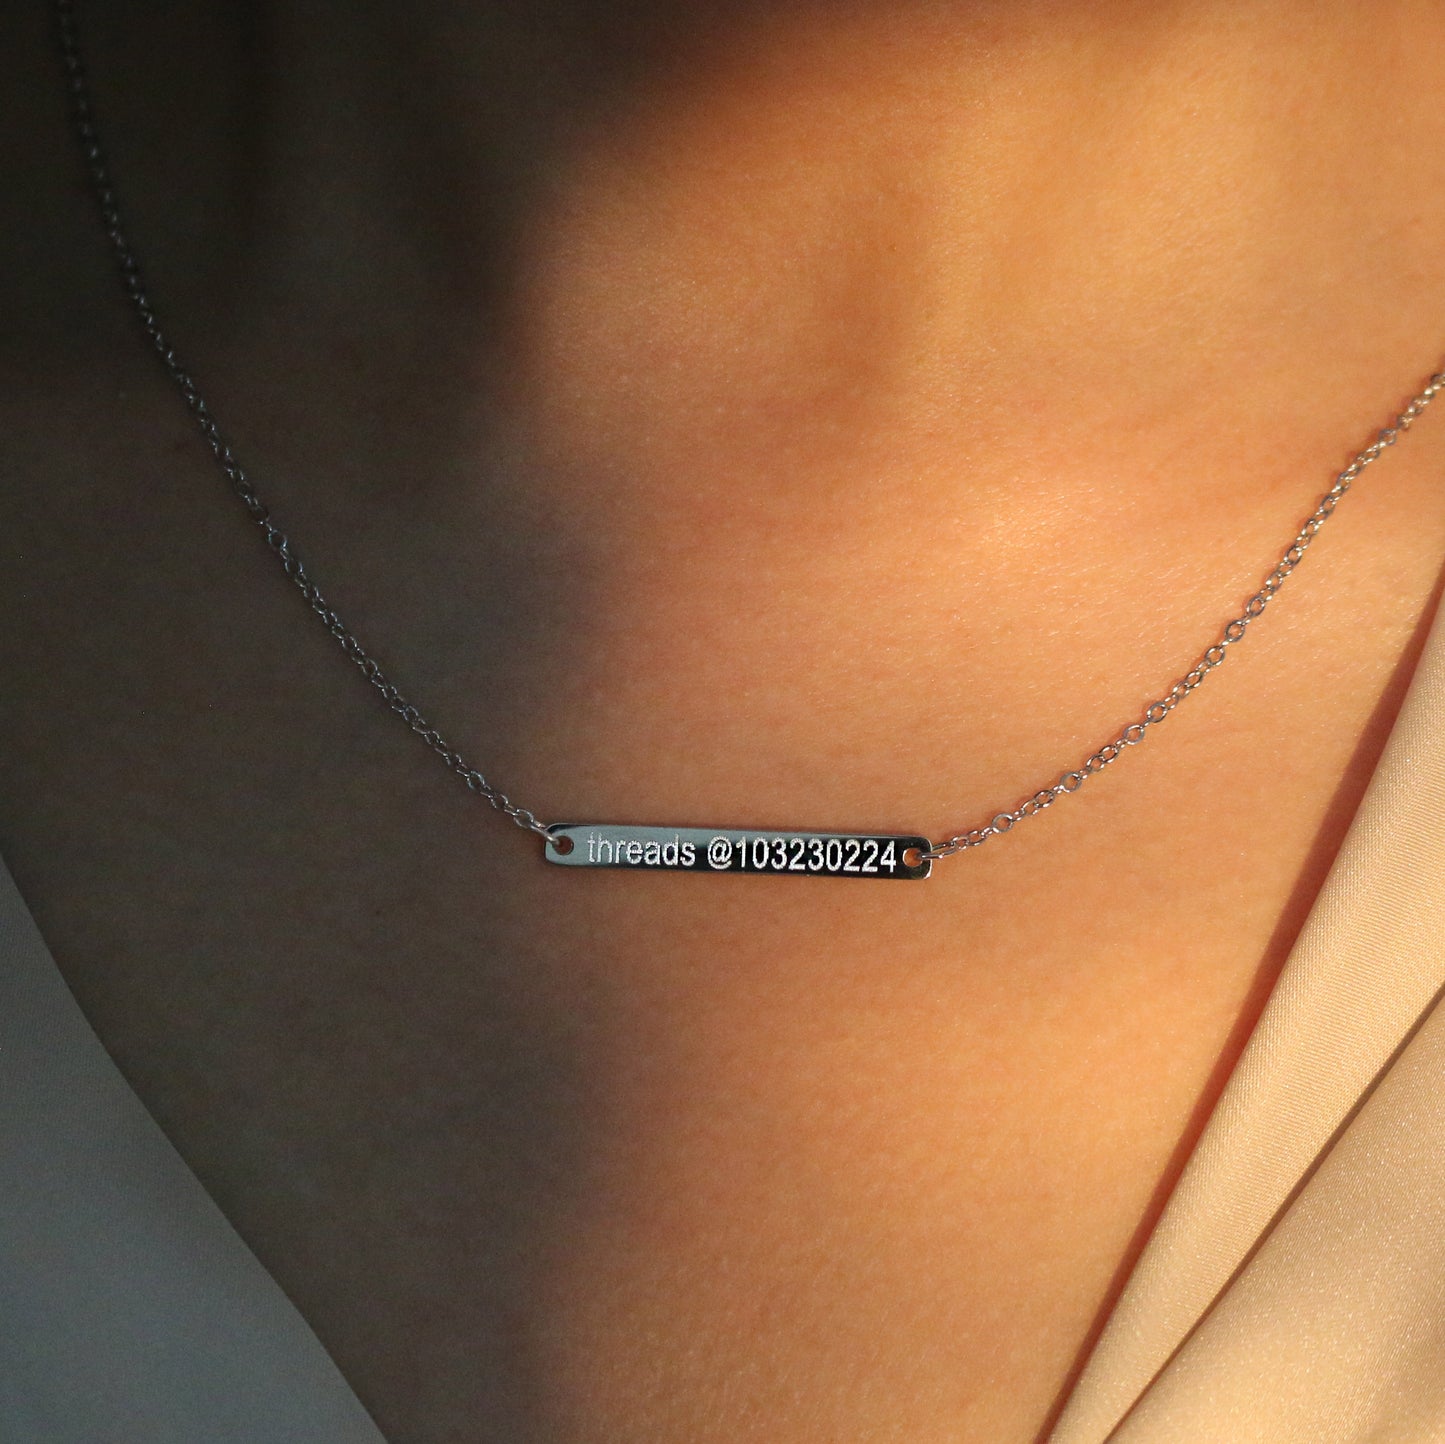 Personalized Name Necklace - Custom Engraved Necklace